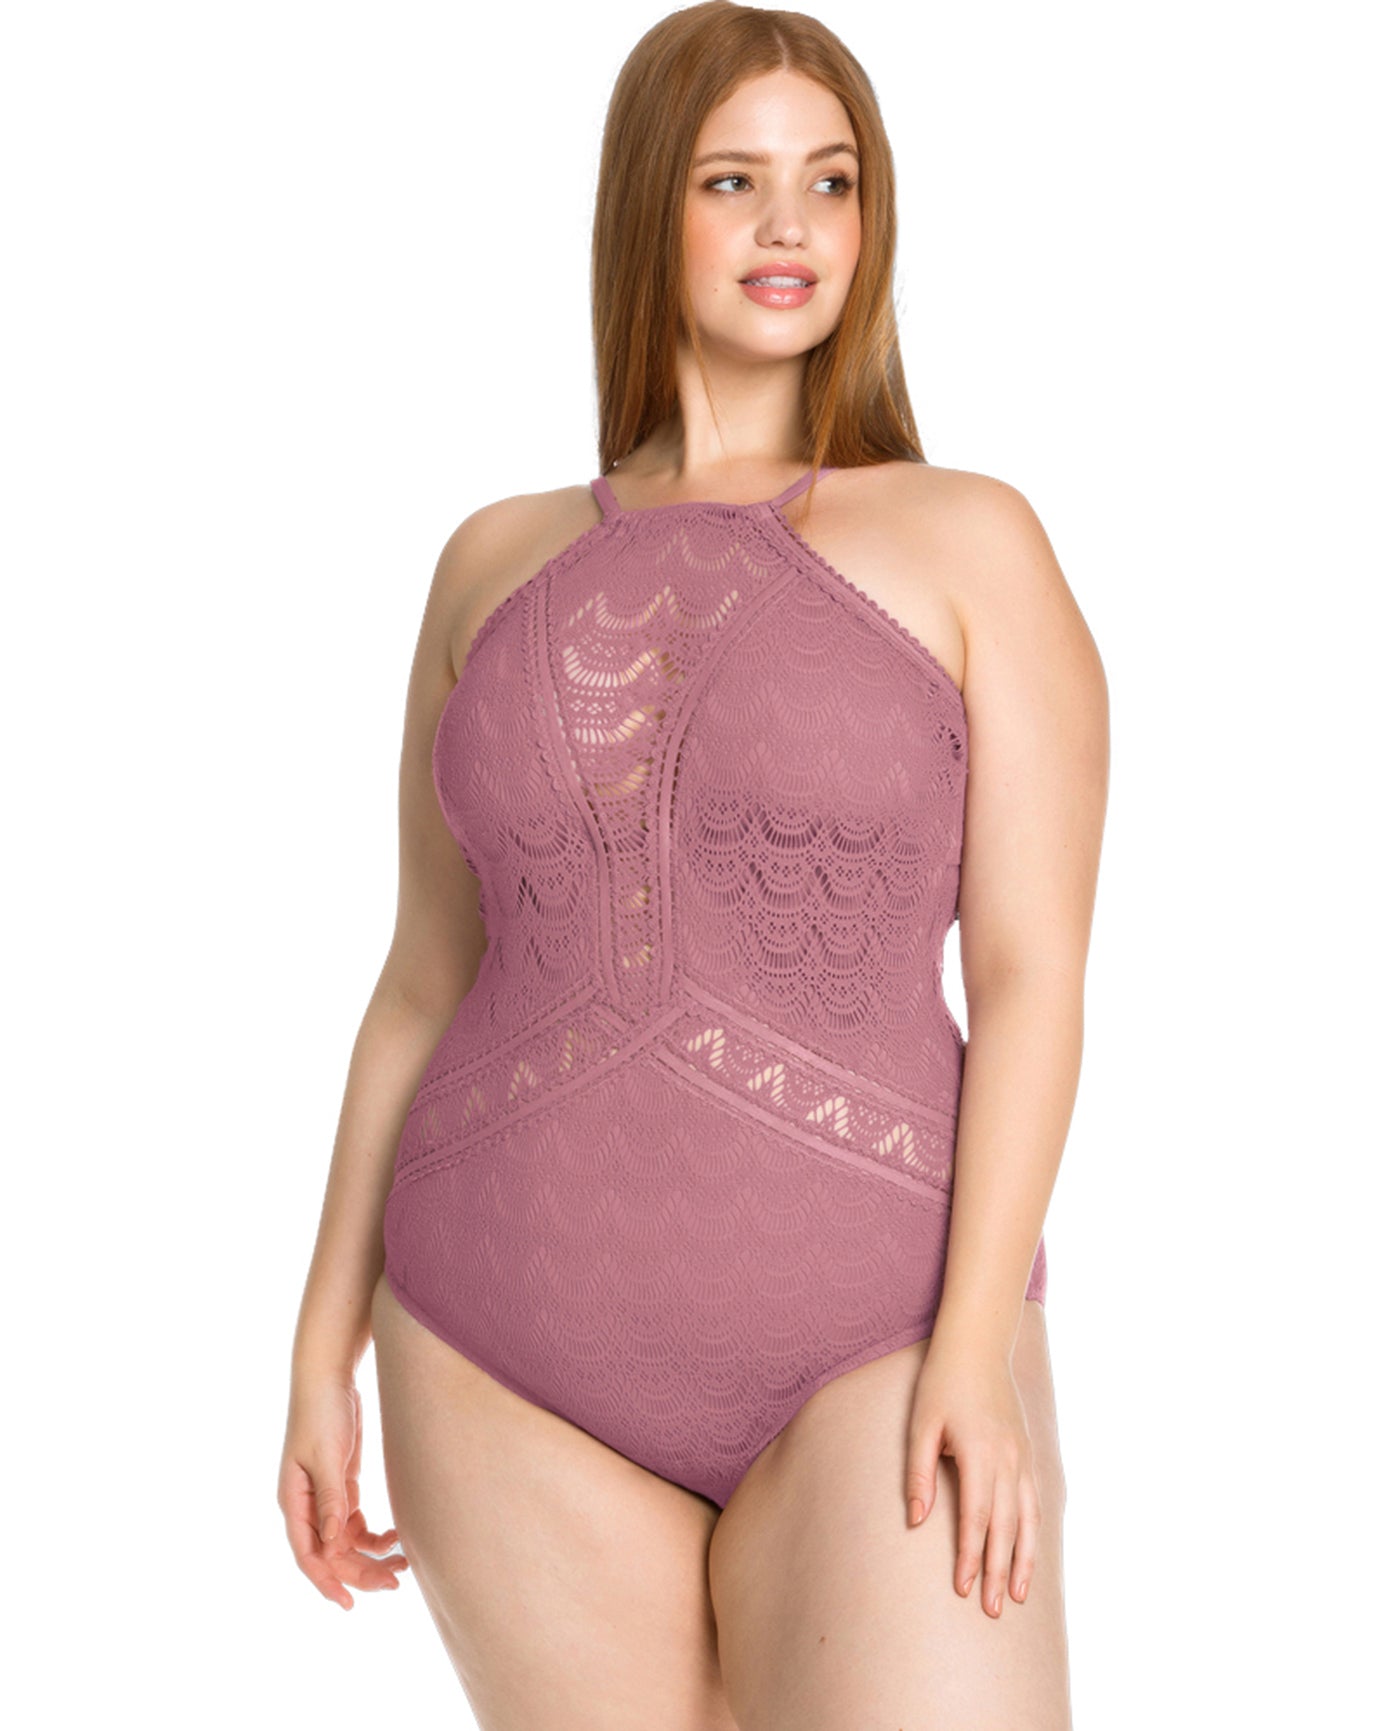 Front View Of Becca ETC by Rebecca Virtue Color Play Lace High Neck Plus Size One Piece Swimsuit | BEC Color Play Mauve